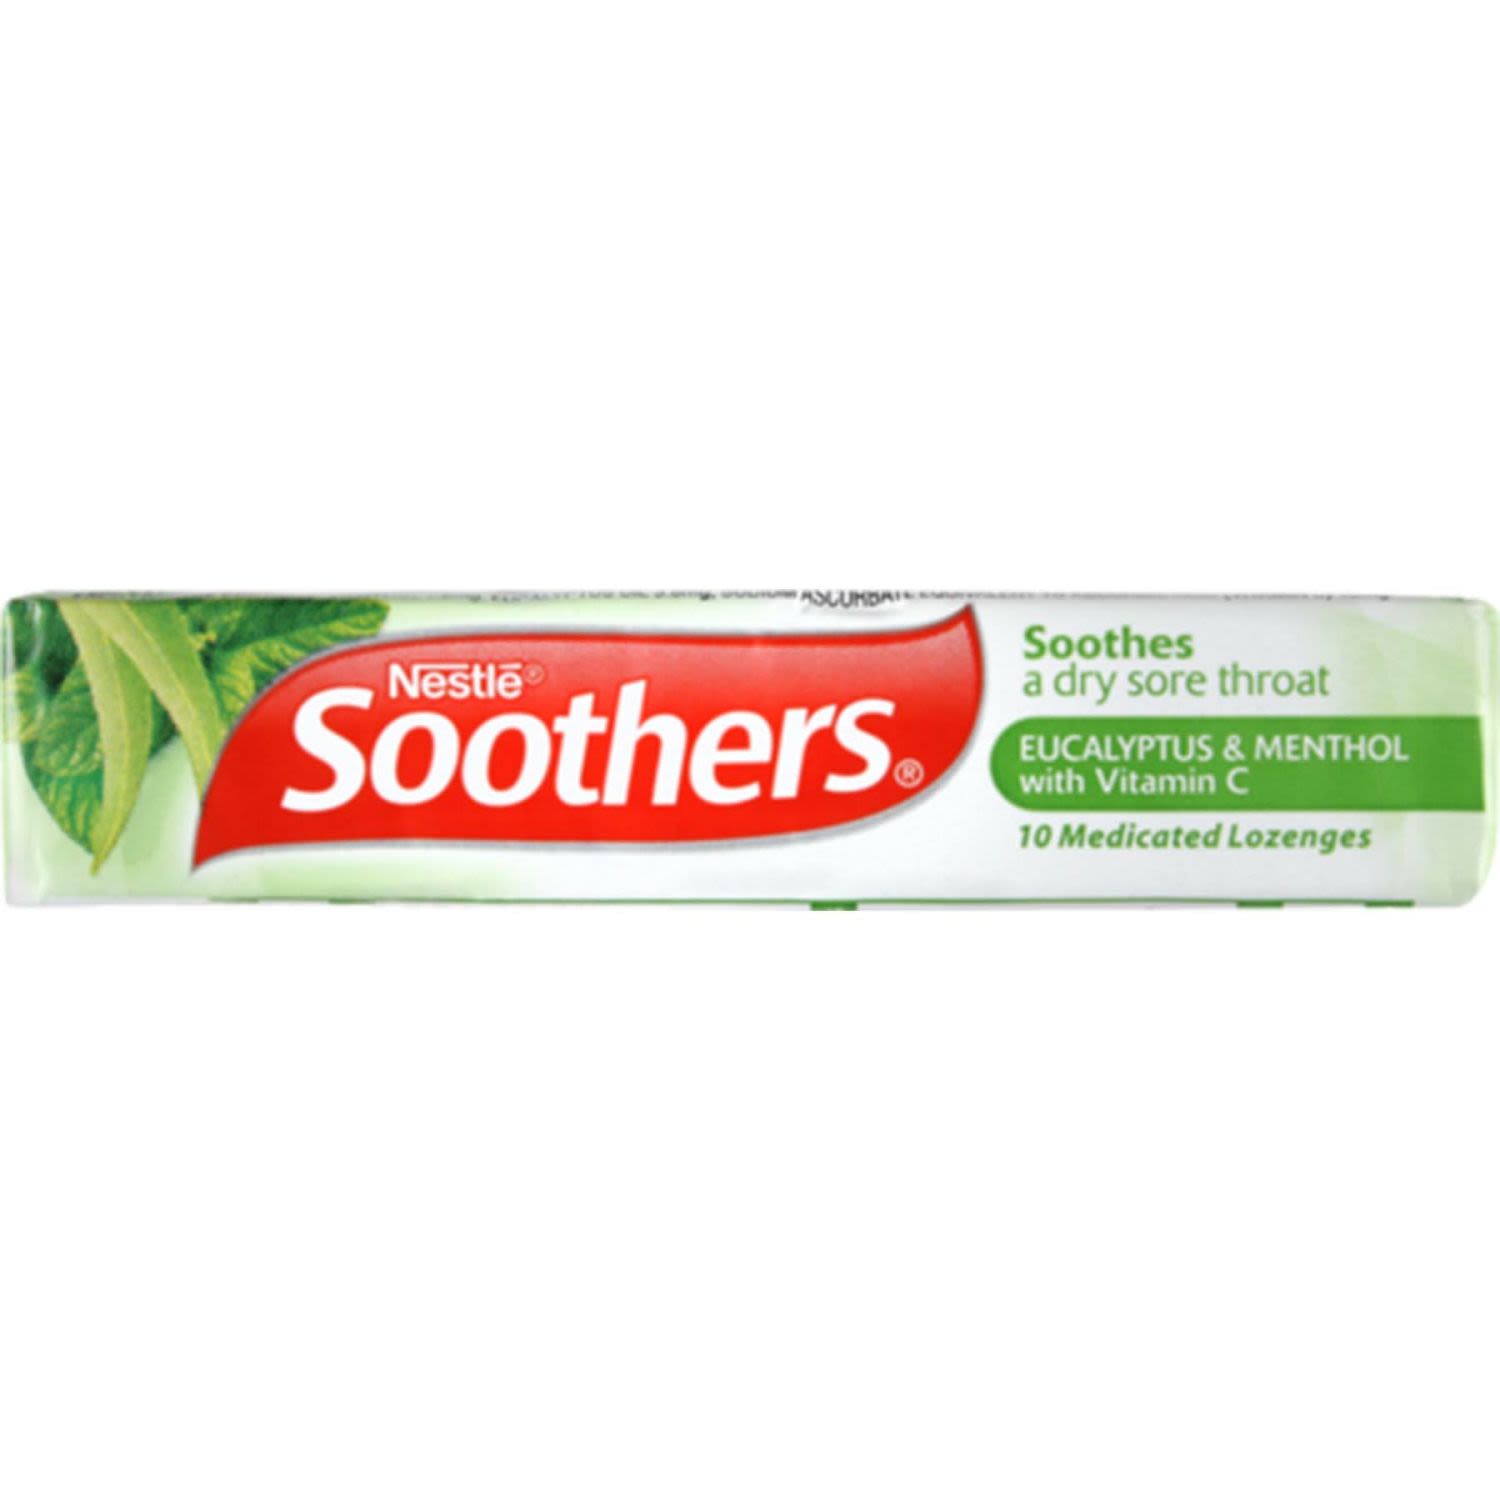 Allens Soothers Eucalyptus & Menthol 40gm